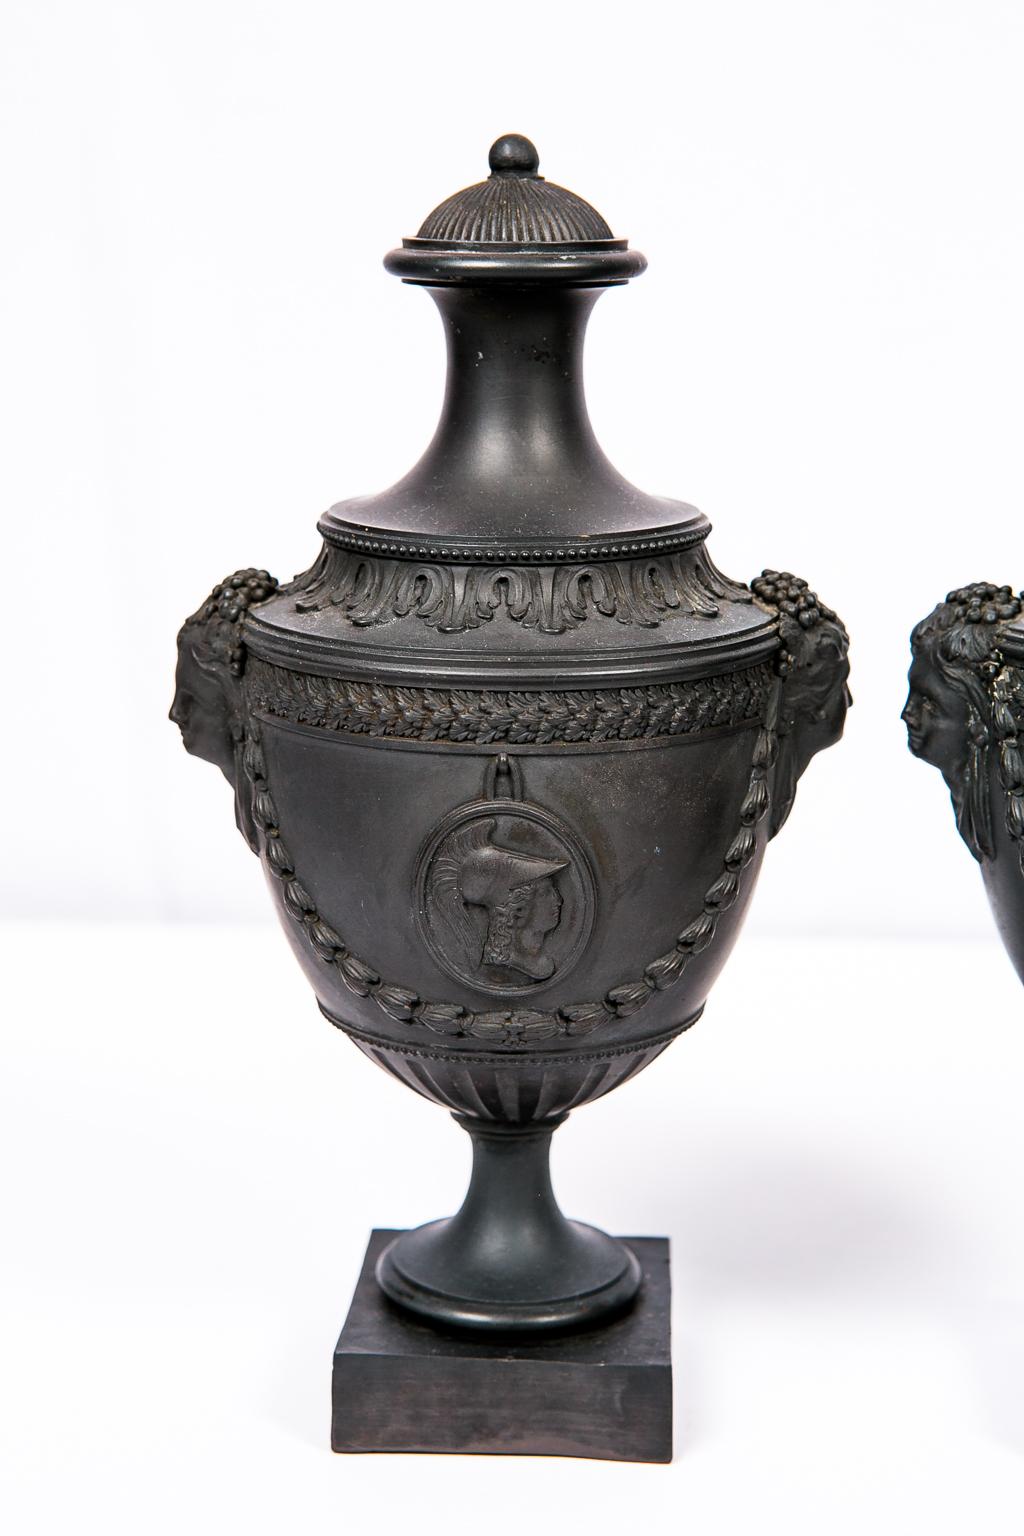 Neoclassical Pair of 18th Century Black Basalt Covered Urns